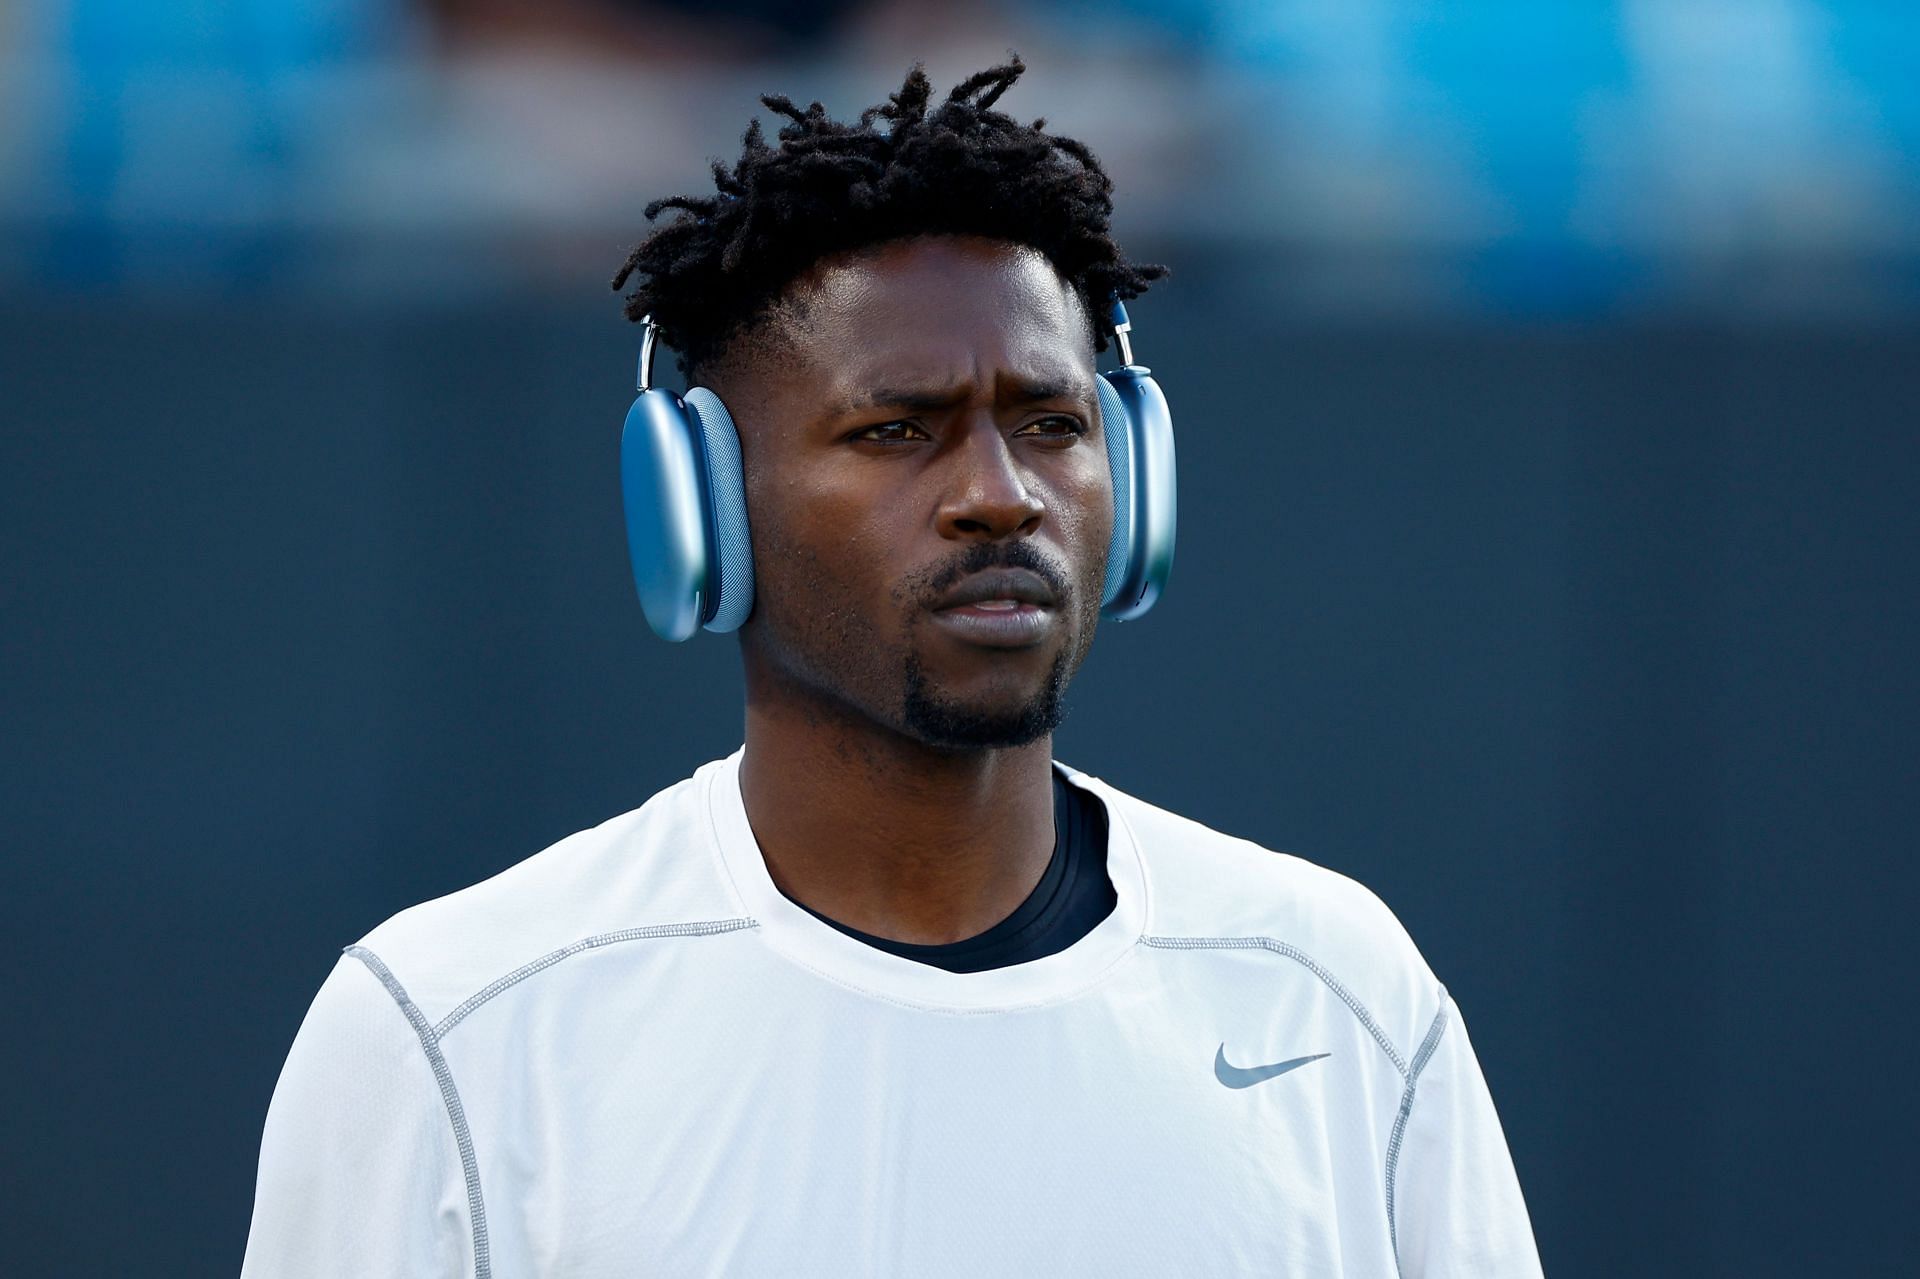 Antonio Brown has claimed that his account was hacked After he was